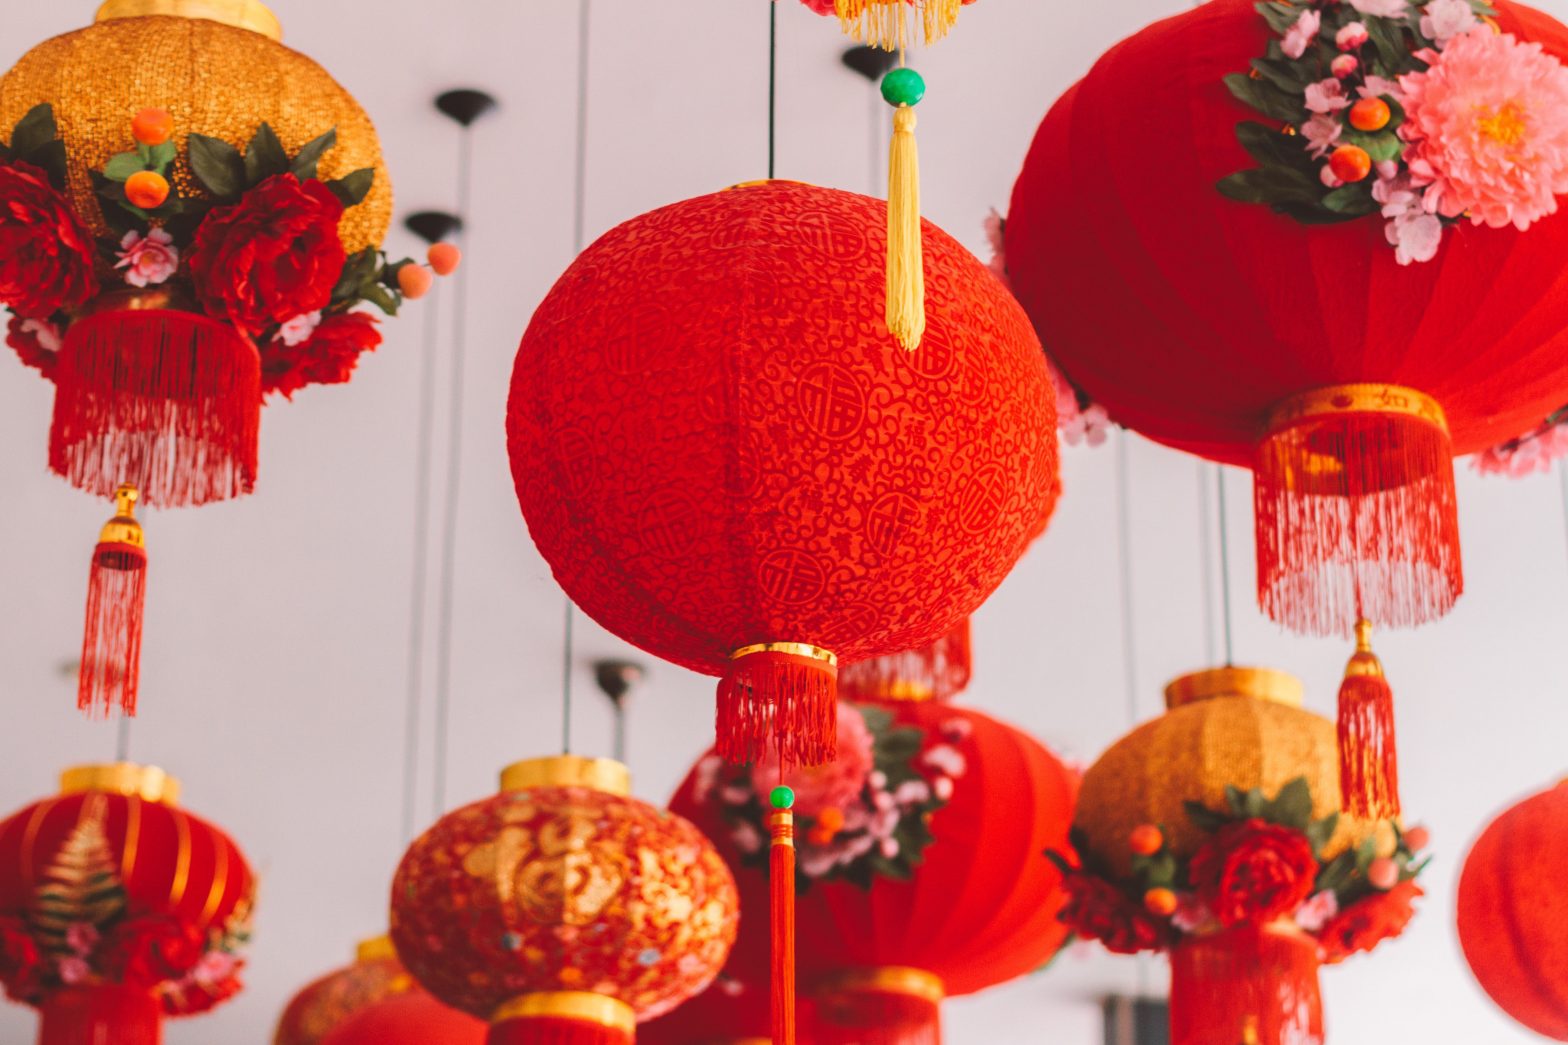 Where to celebrate Chinese New Year 2023 in California, New York, New Jersey, Texas, Florida, Pennsylvania, DC